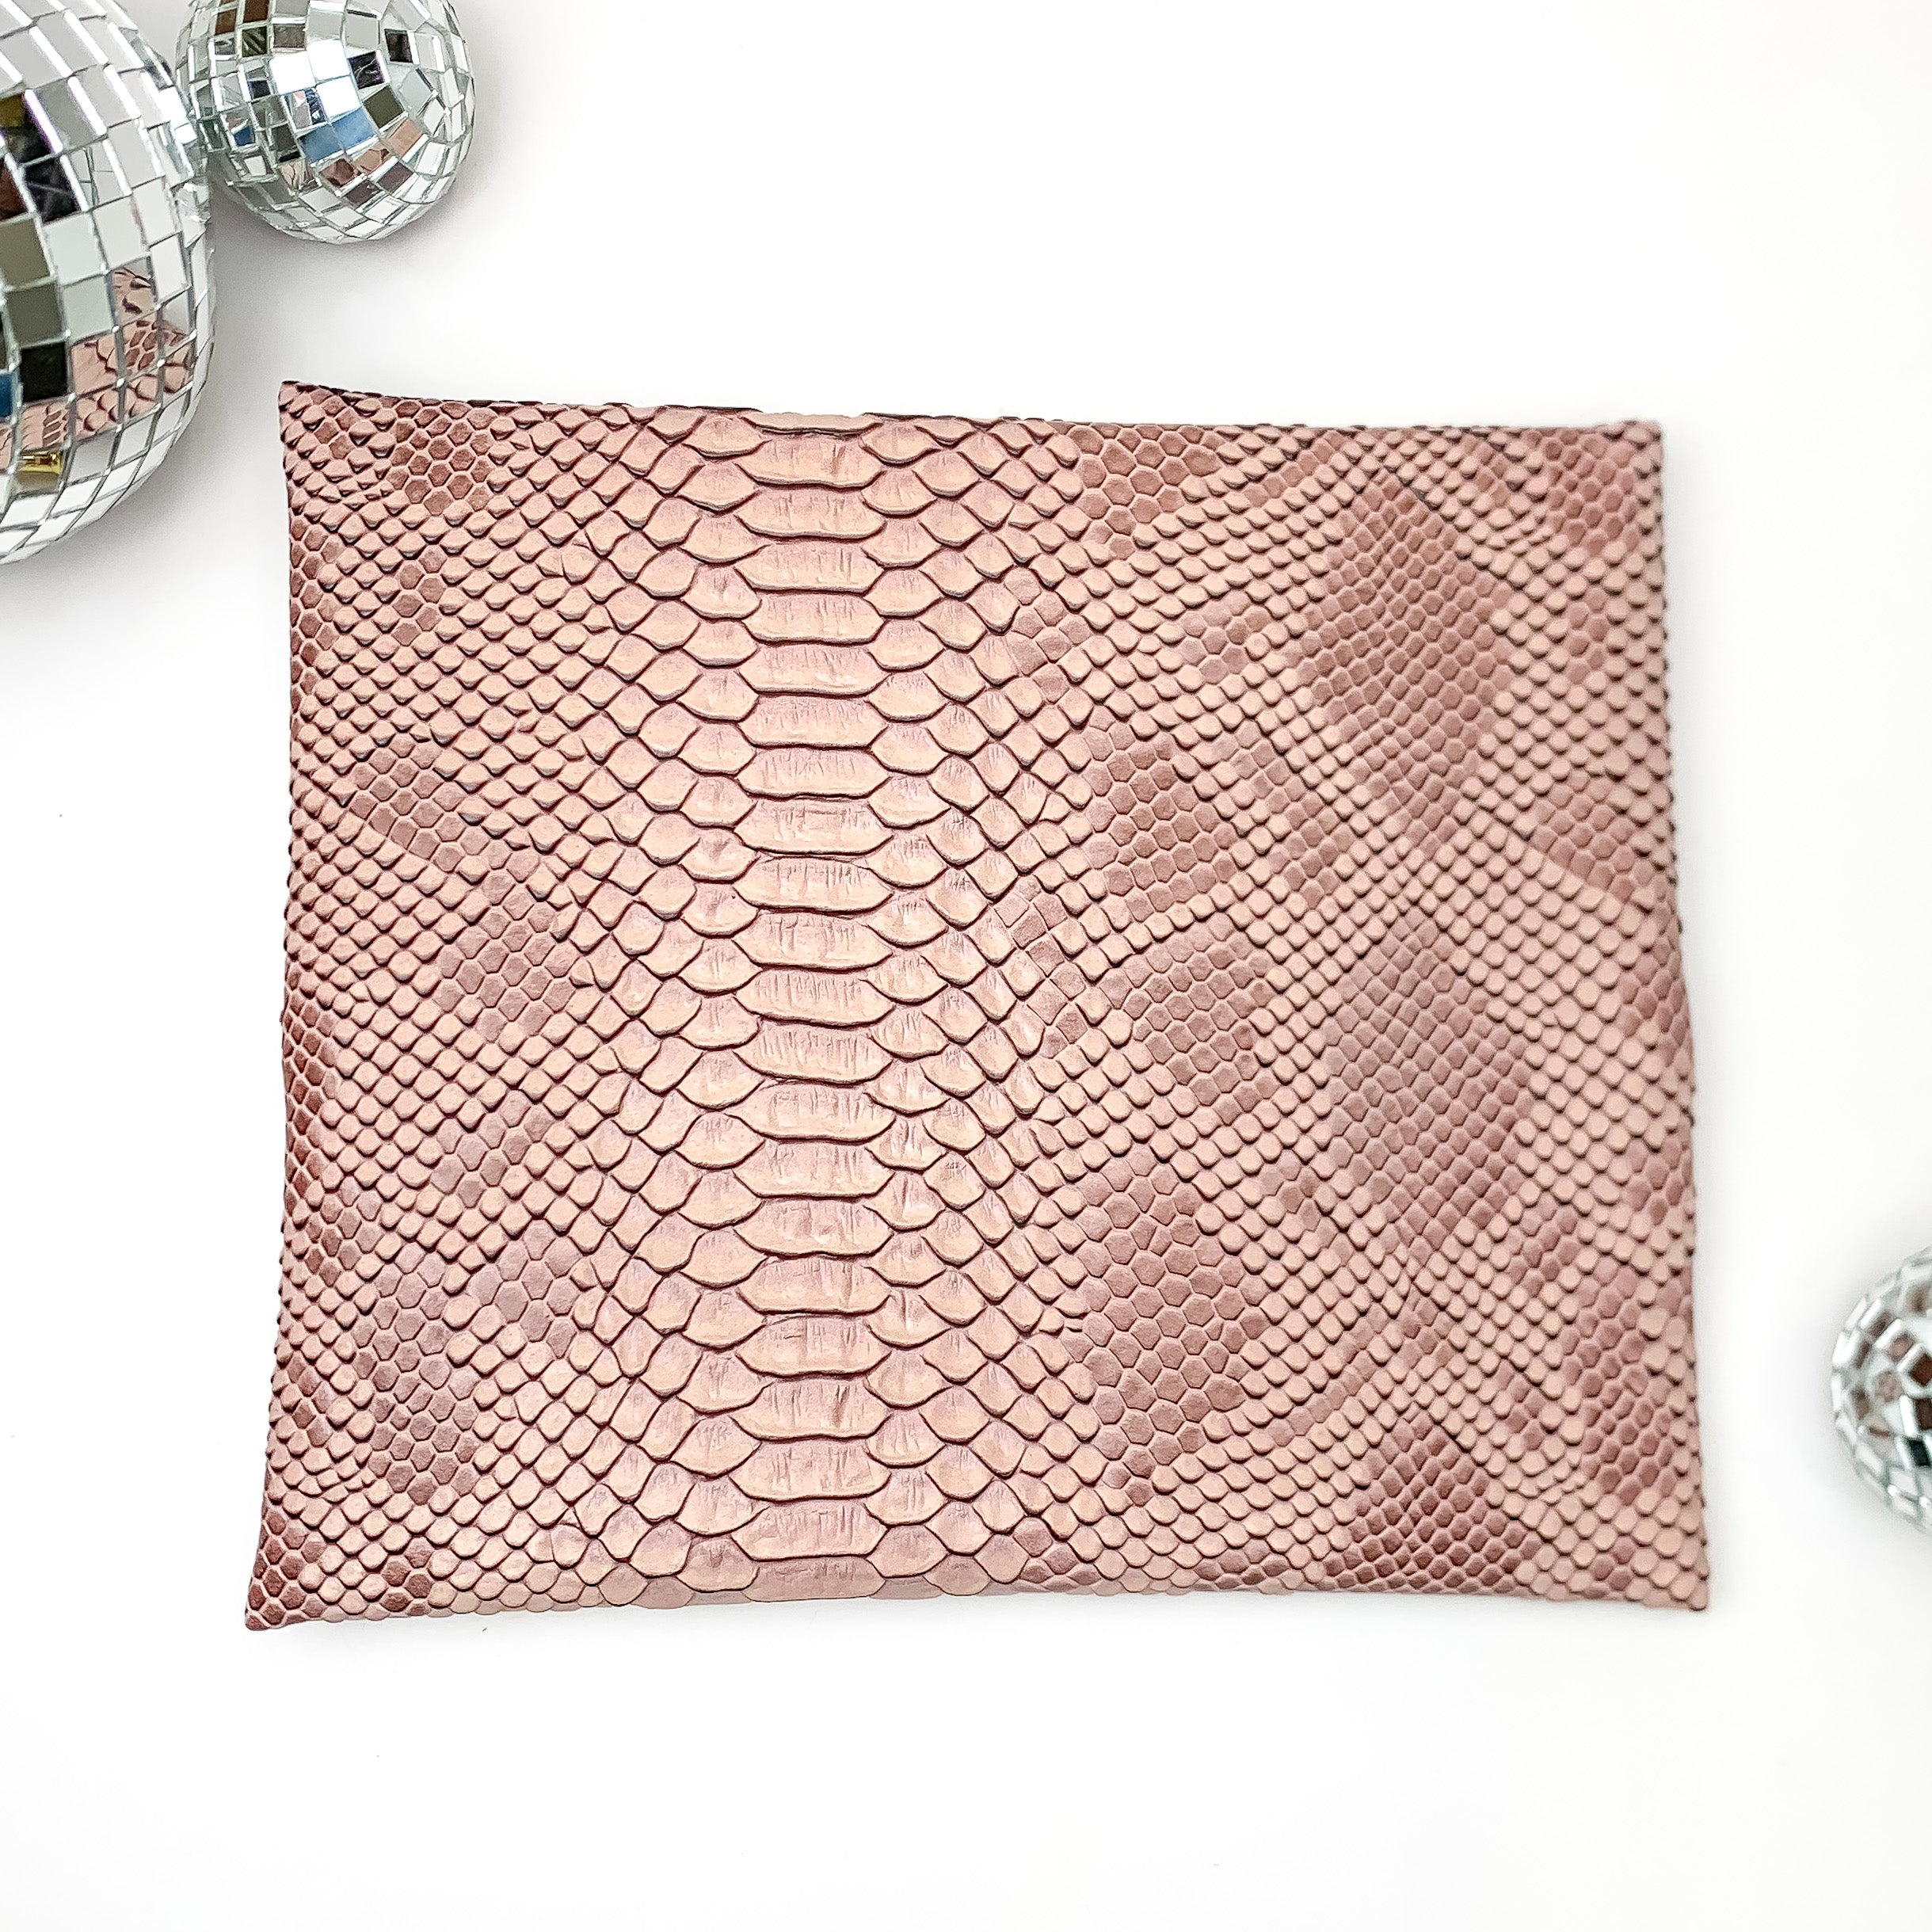 Makeup Junkie | Small Copperazzi Lay Flat Bag in Dusty Pink Snake Print - Giddy Up Glamour Boutique